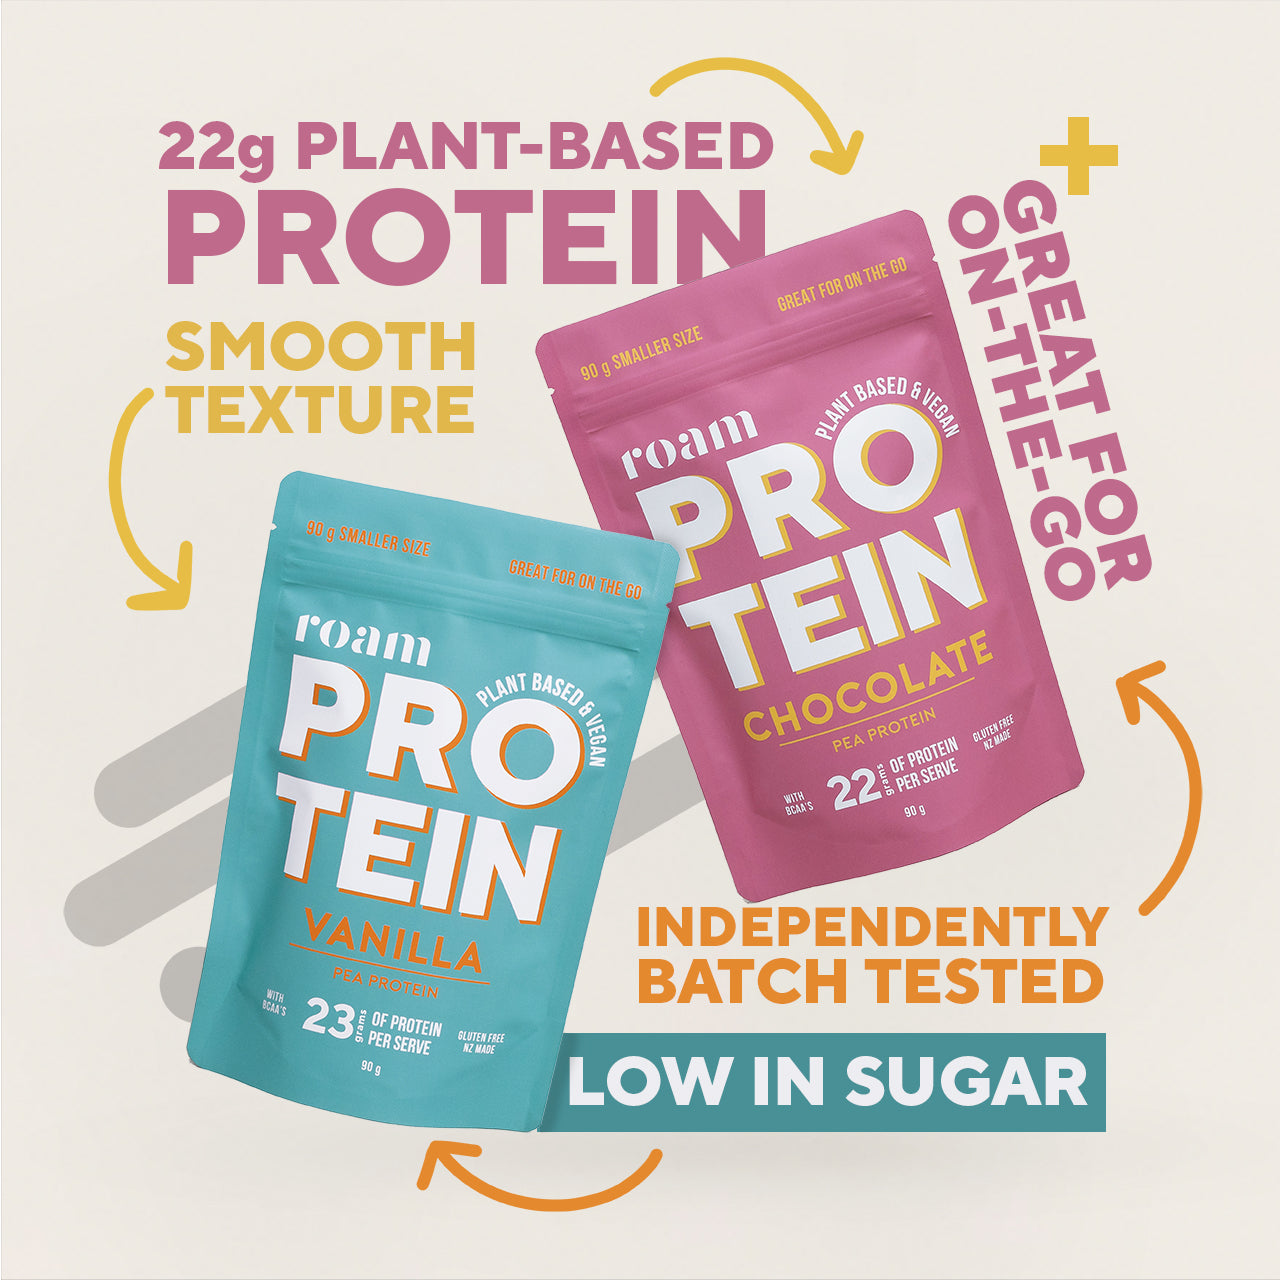 NEW! Sample Size - All Protein Flavours